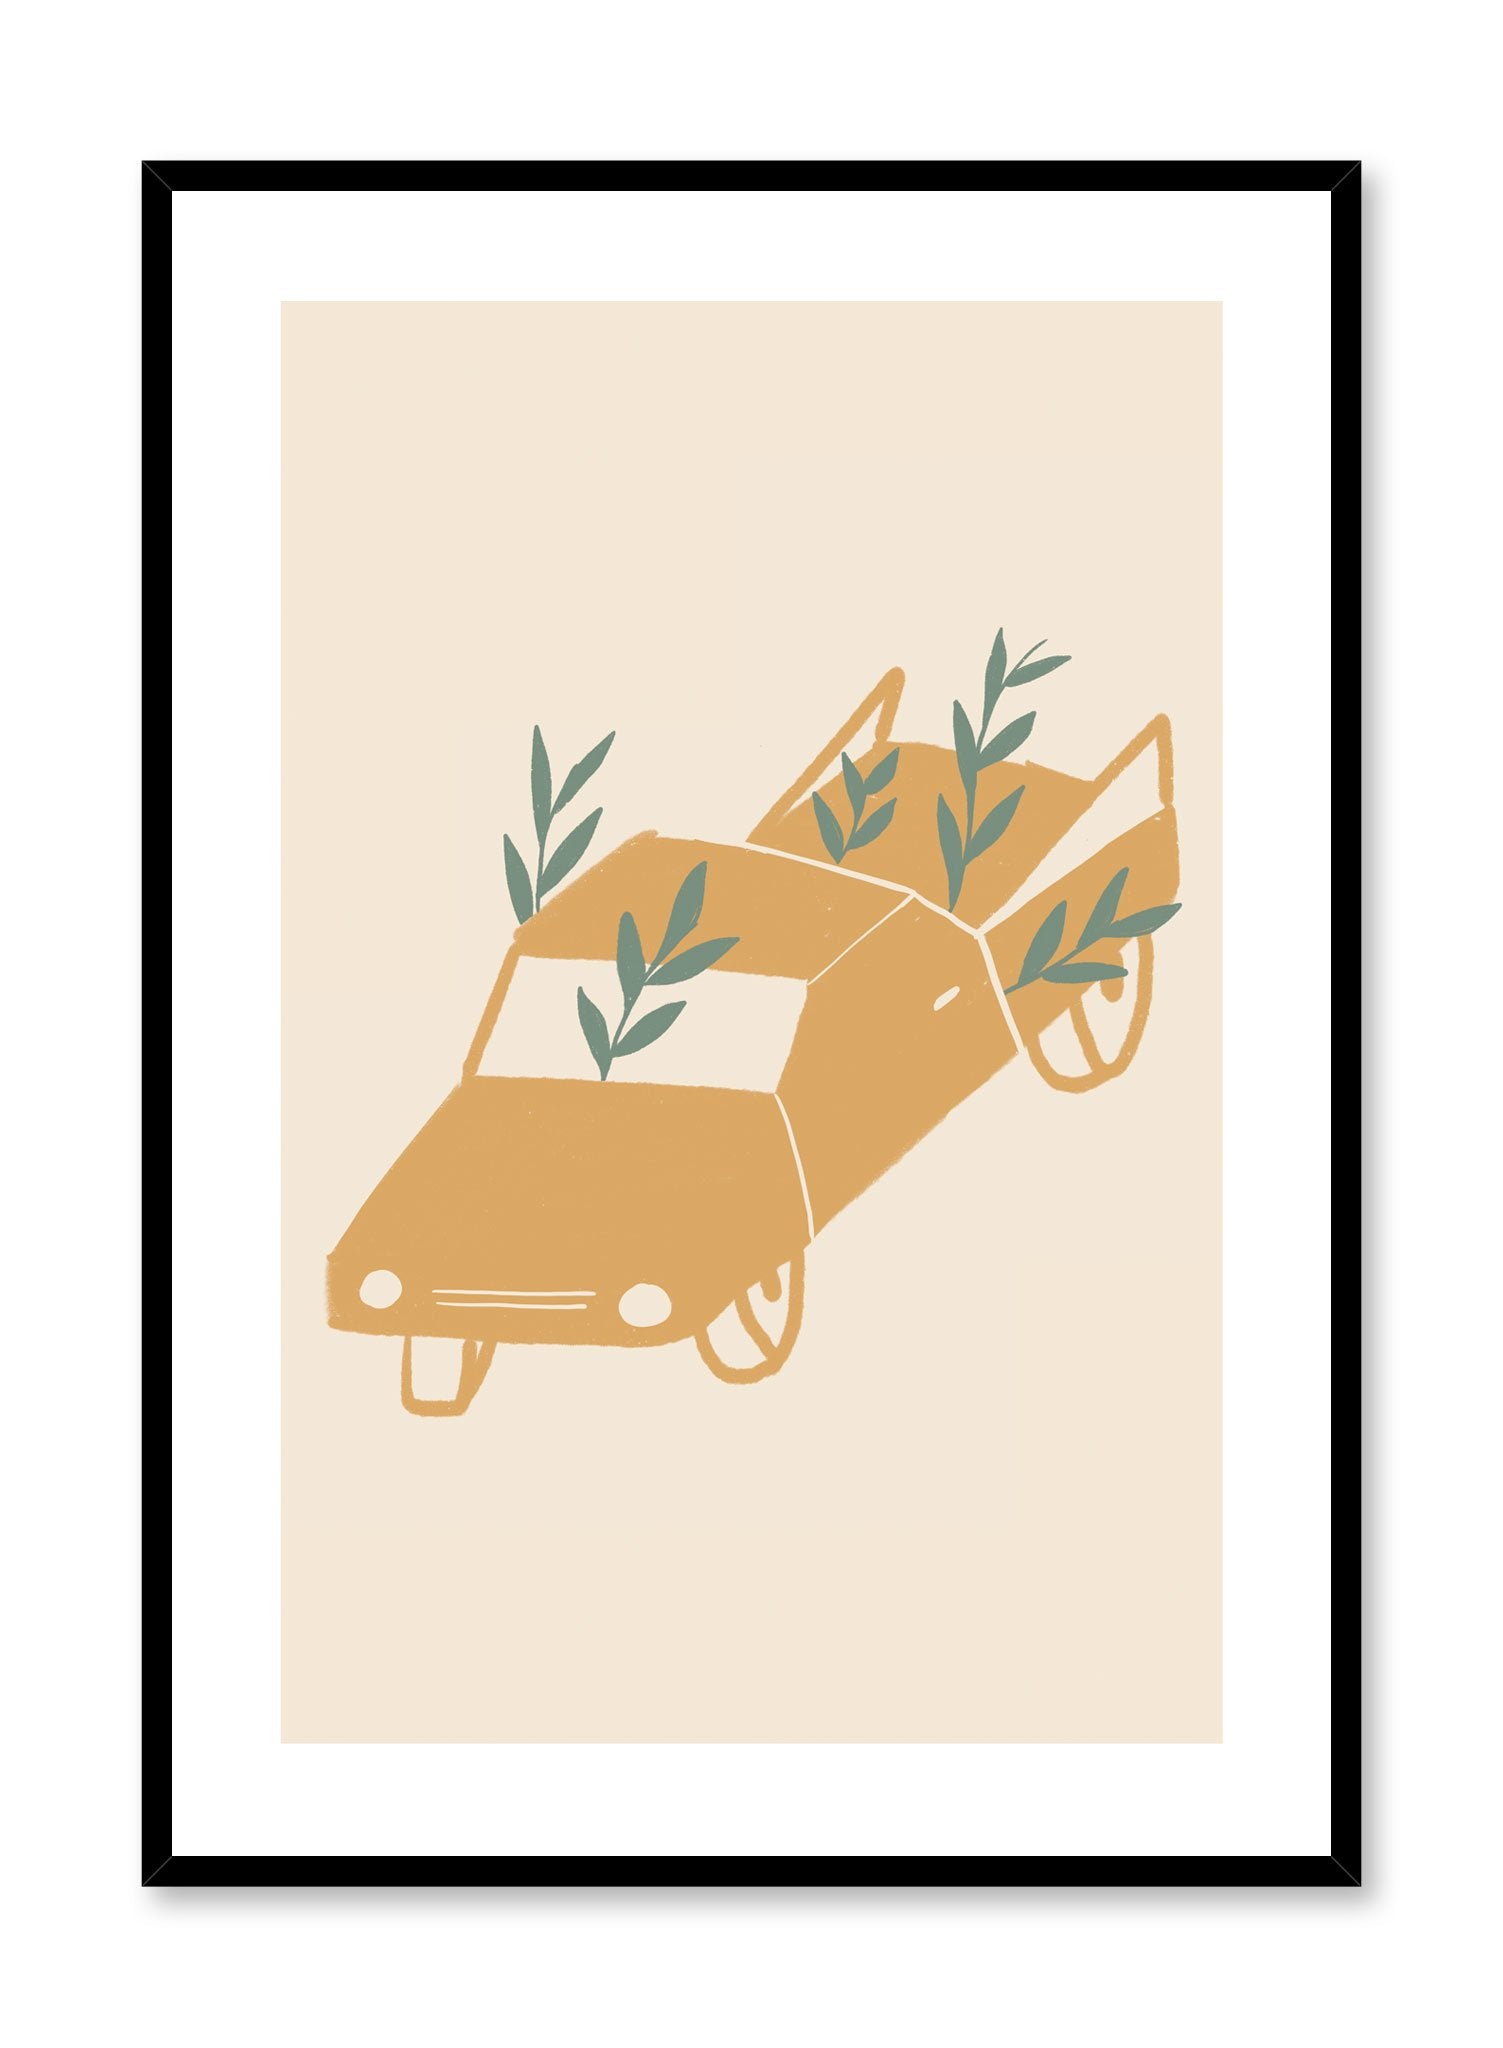 Grandpa’s Truck is a minimalist illustration by Opposite Wall of an orange truck covered with green leaves of plants.